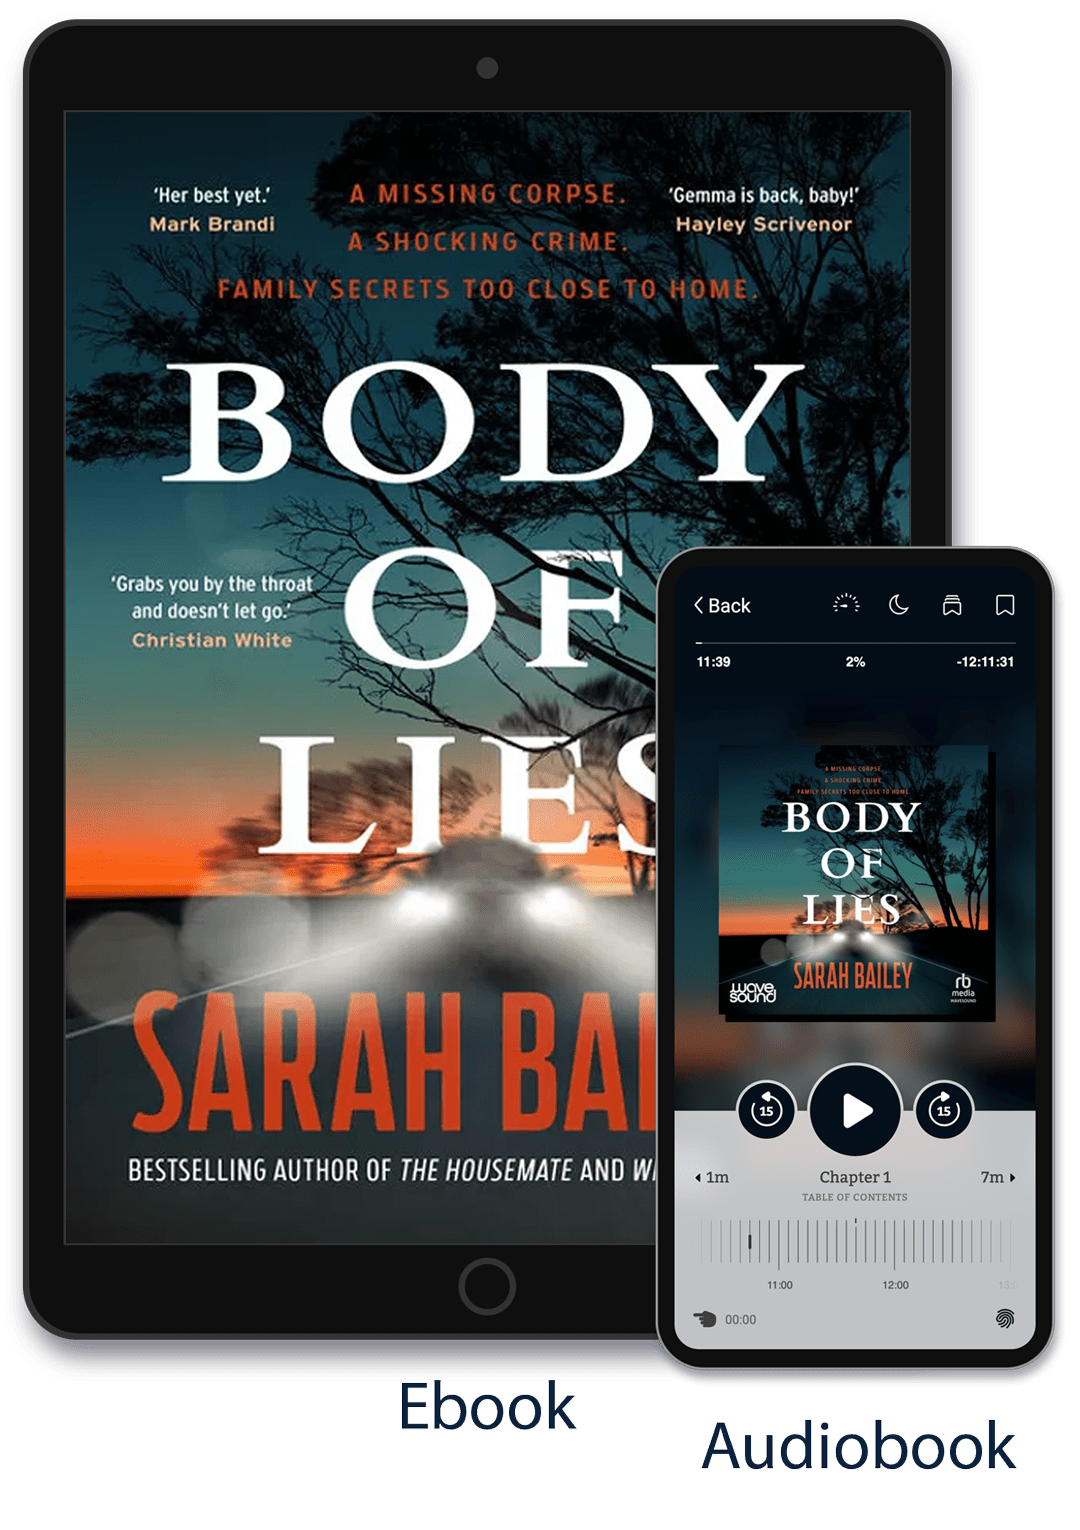 Body of Lies book cover